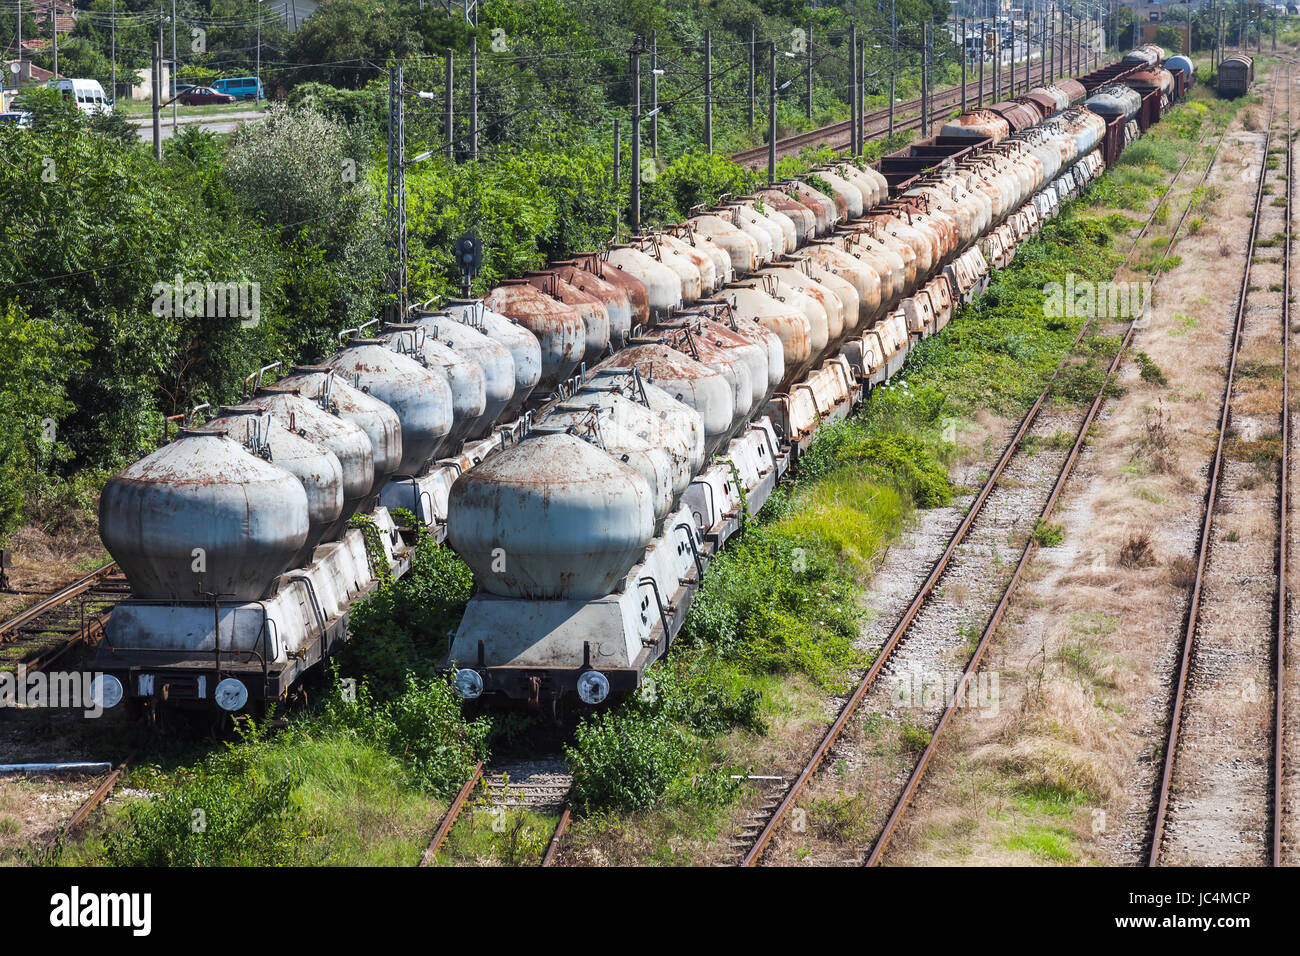 [Image: tank-carriages-stand-on-railway-in-varna...JC4MCP.jpg]